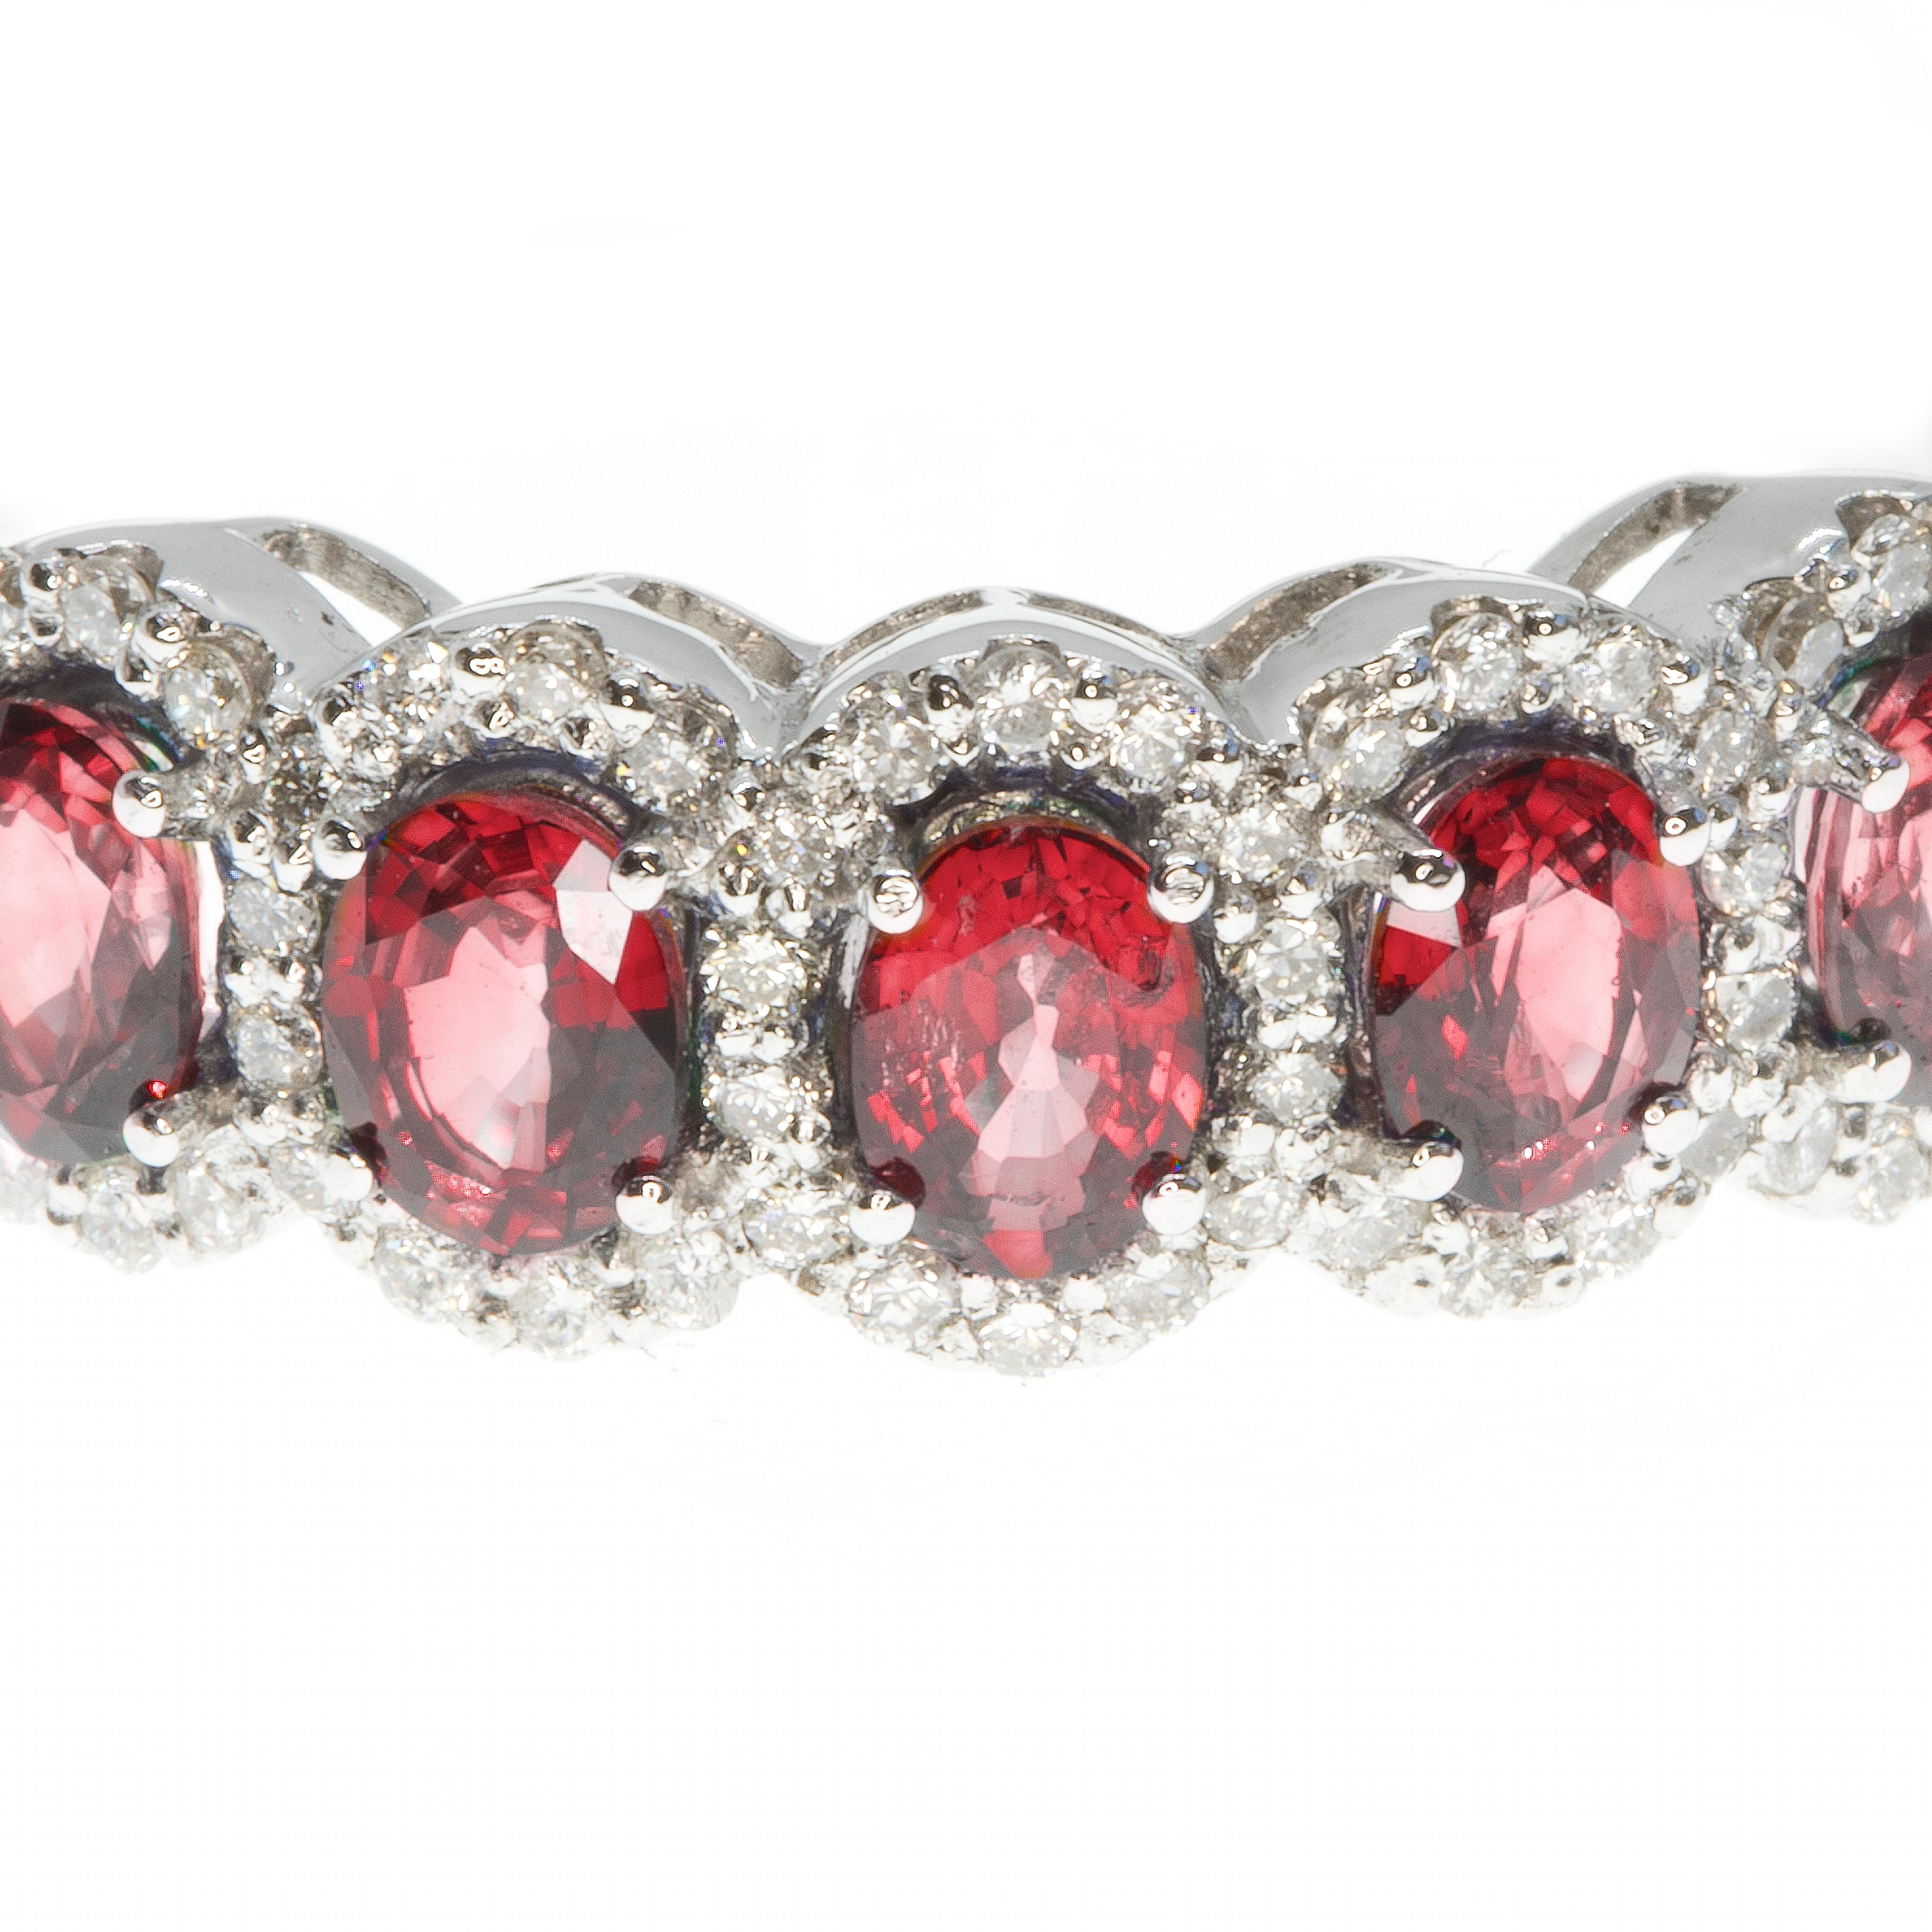 A beautiful ring, masterfully created entirely by hand and featuring carefully selected rubies and white diamonds. The ring has been made from 18-karat white gold.

The ring is equally beautiful on its own or as the jewel of a stack of rings. The